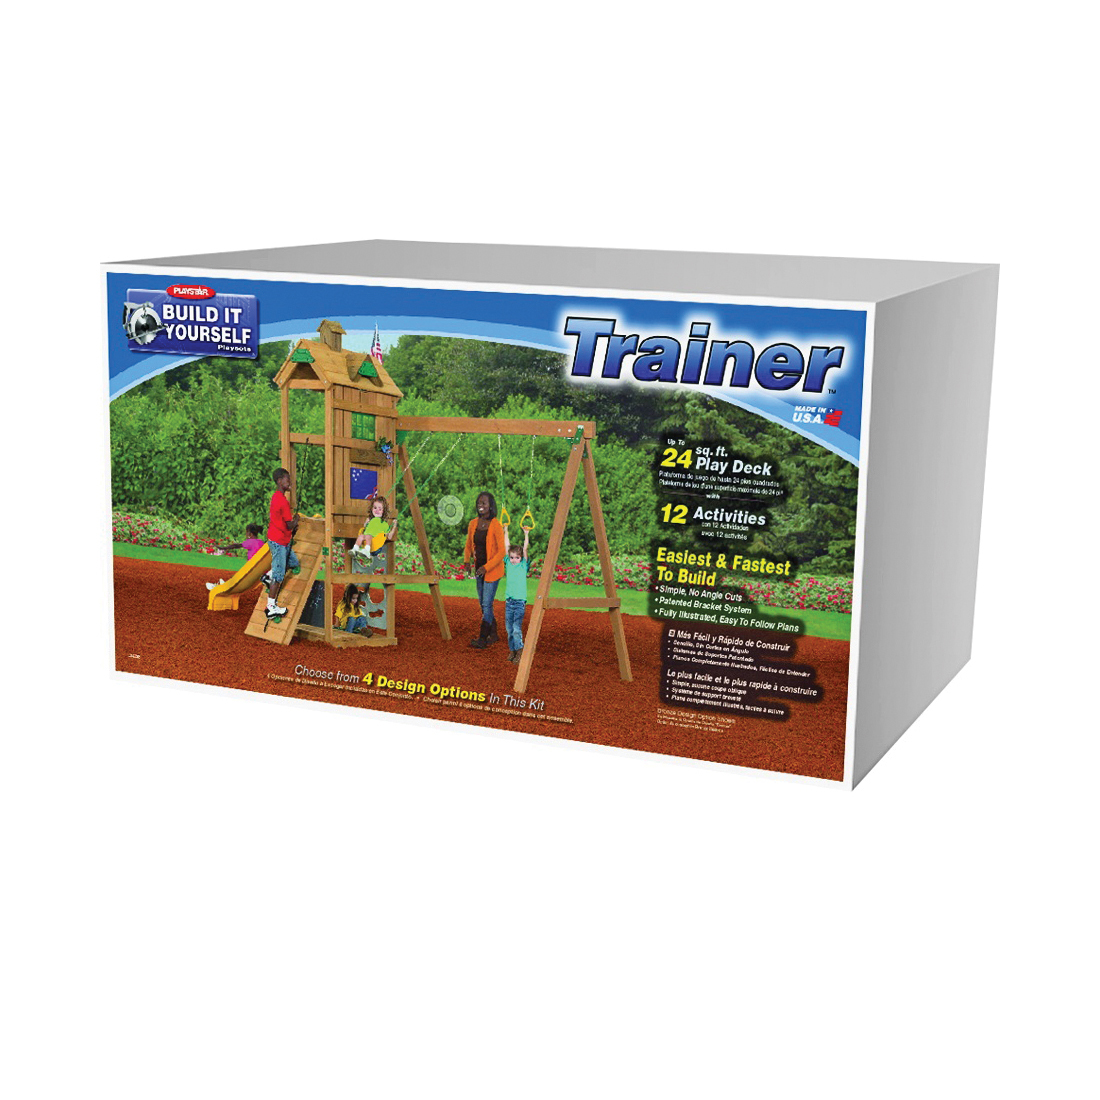 PS 7712 Build It Yourself Playset Kit